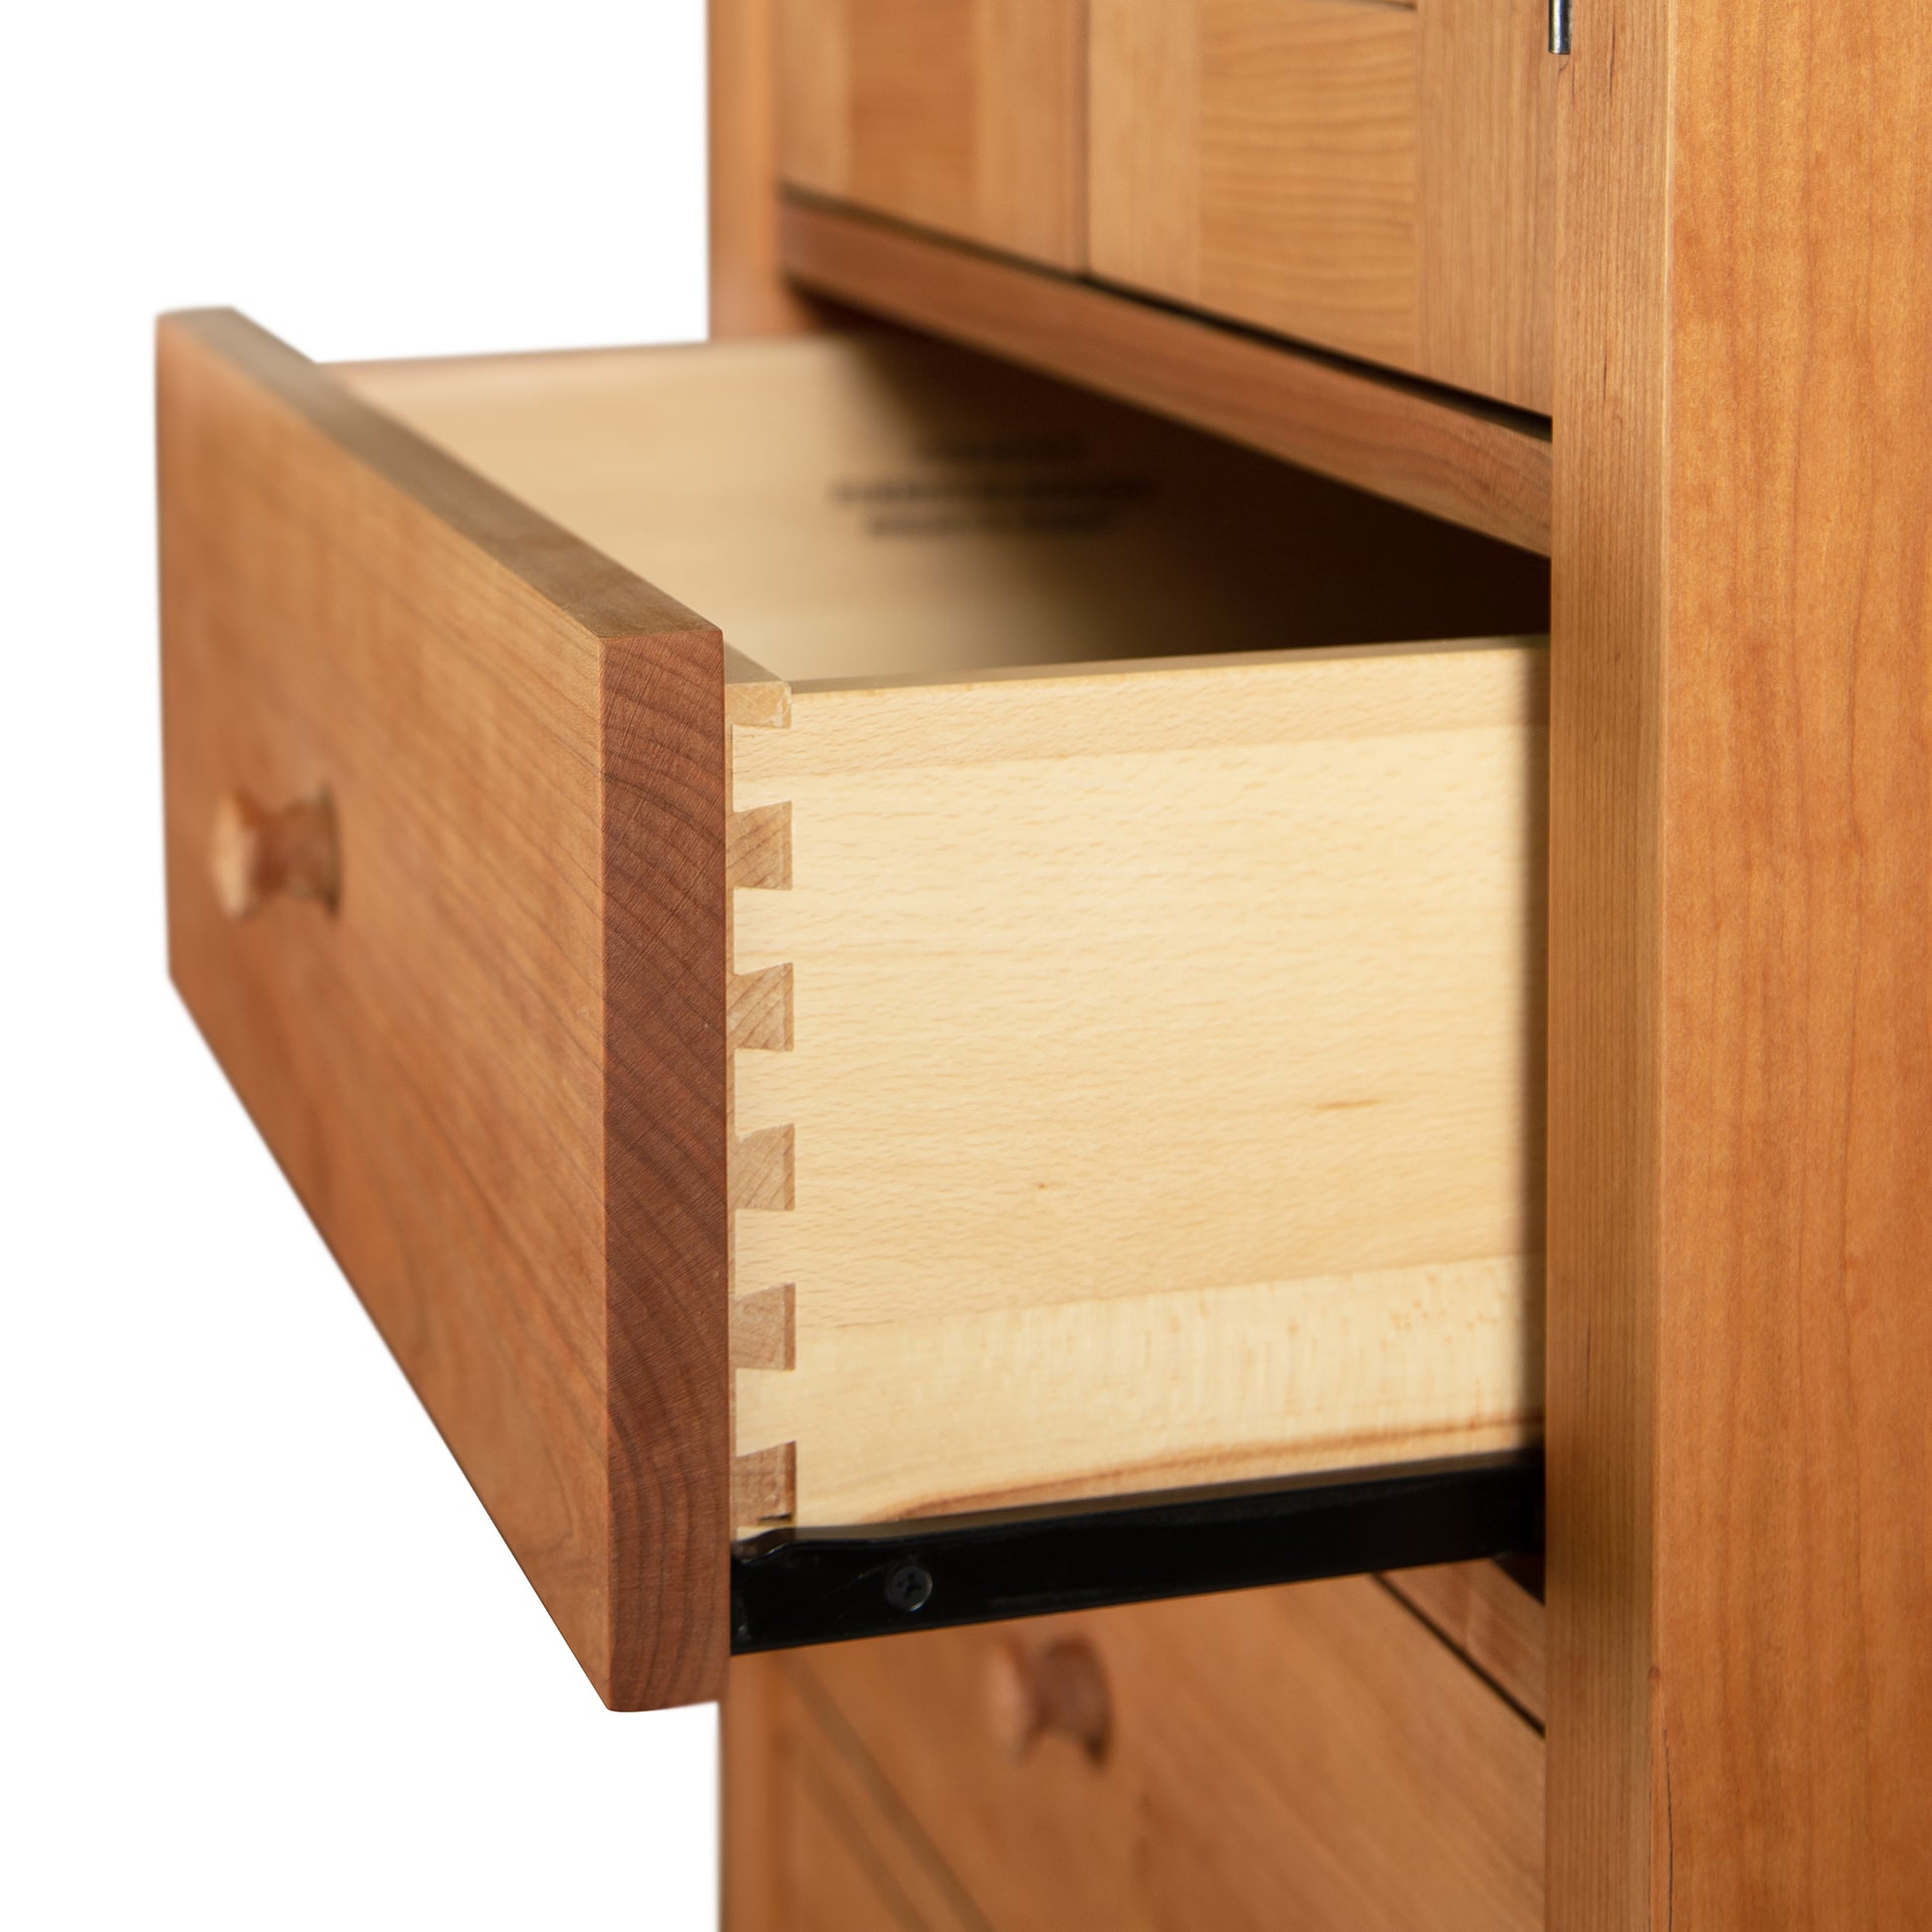 An open Burlington Shaker Tall Storage Chest drawer showcasing dovetail joints, with other drawers in the background. (Brand Name: Vermont Furniture Designs)